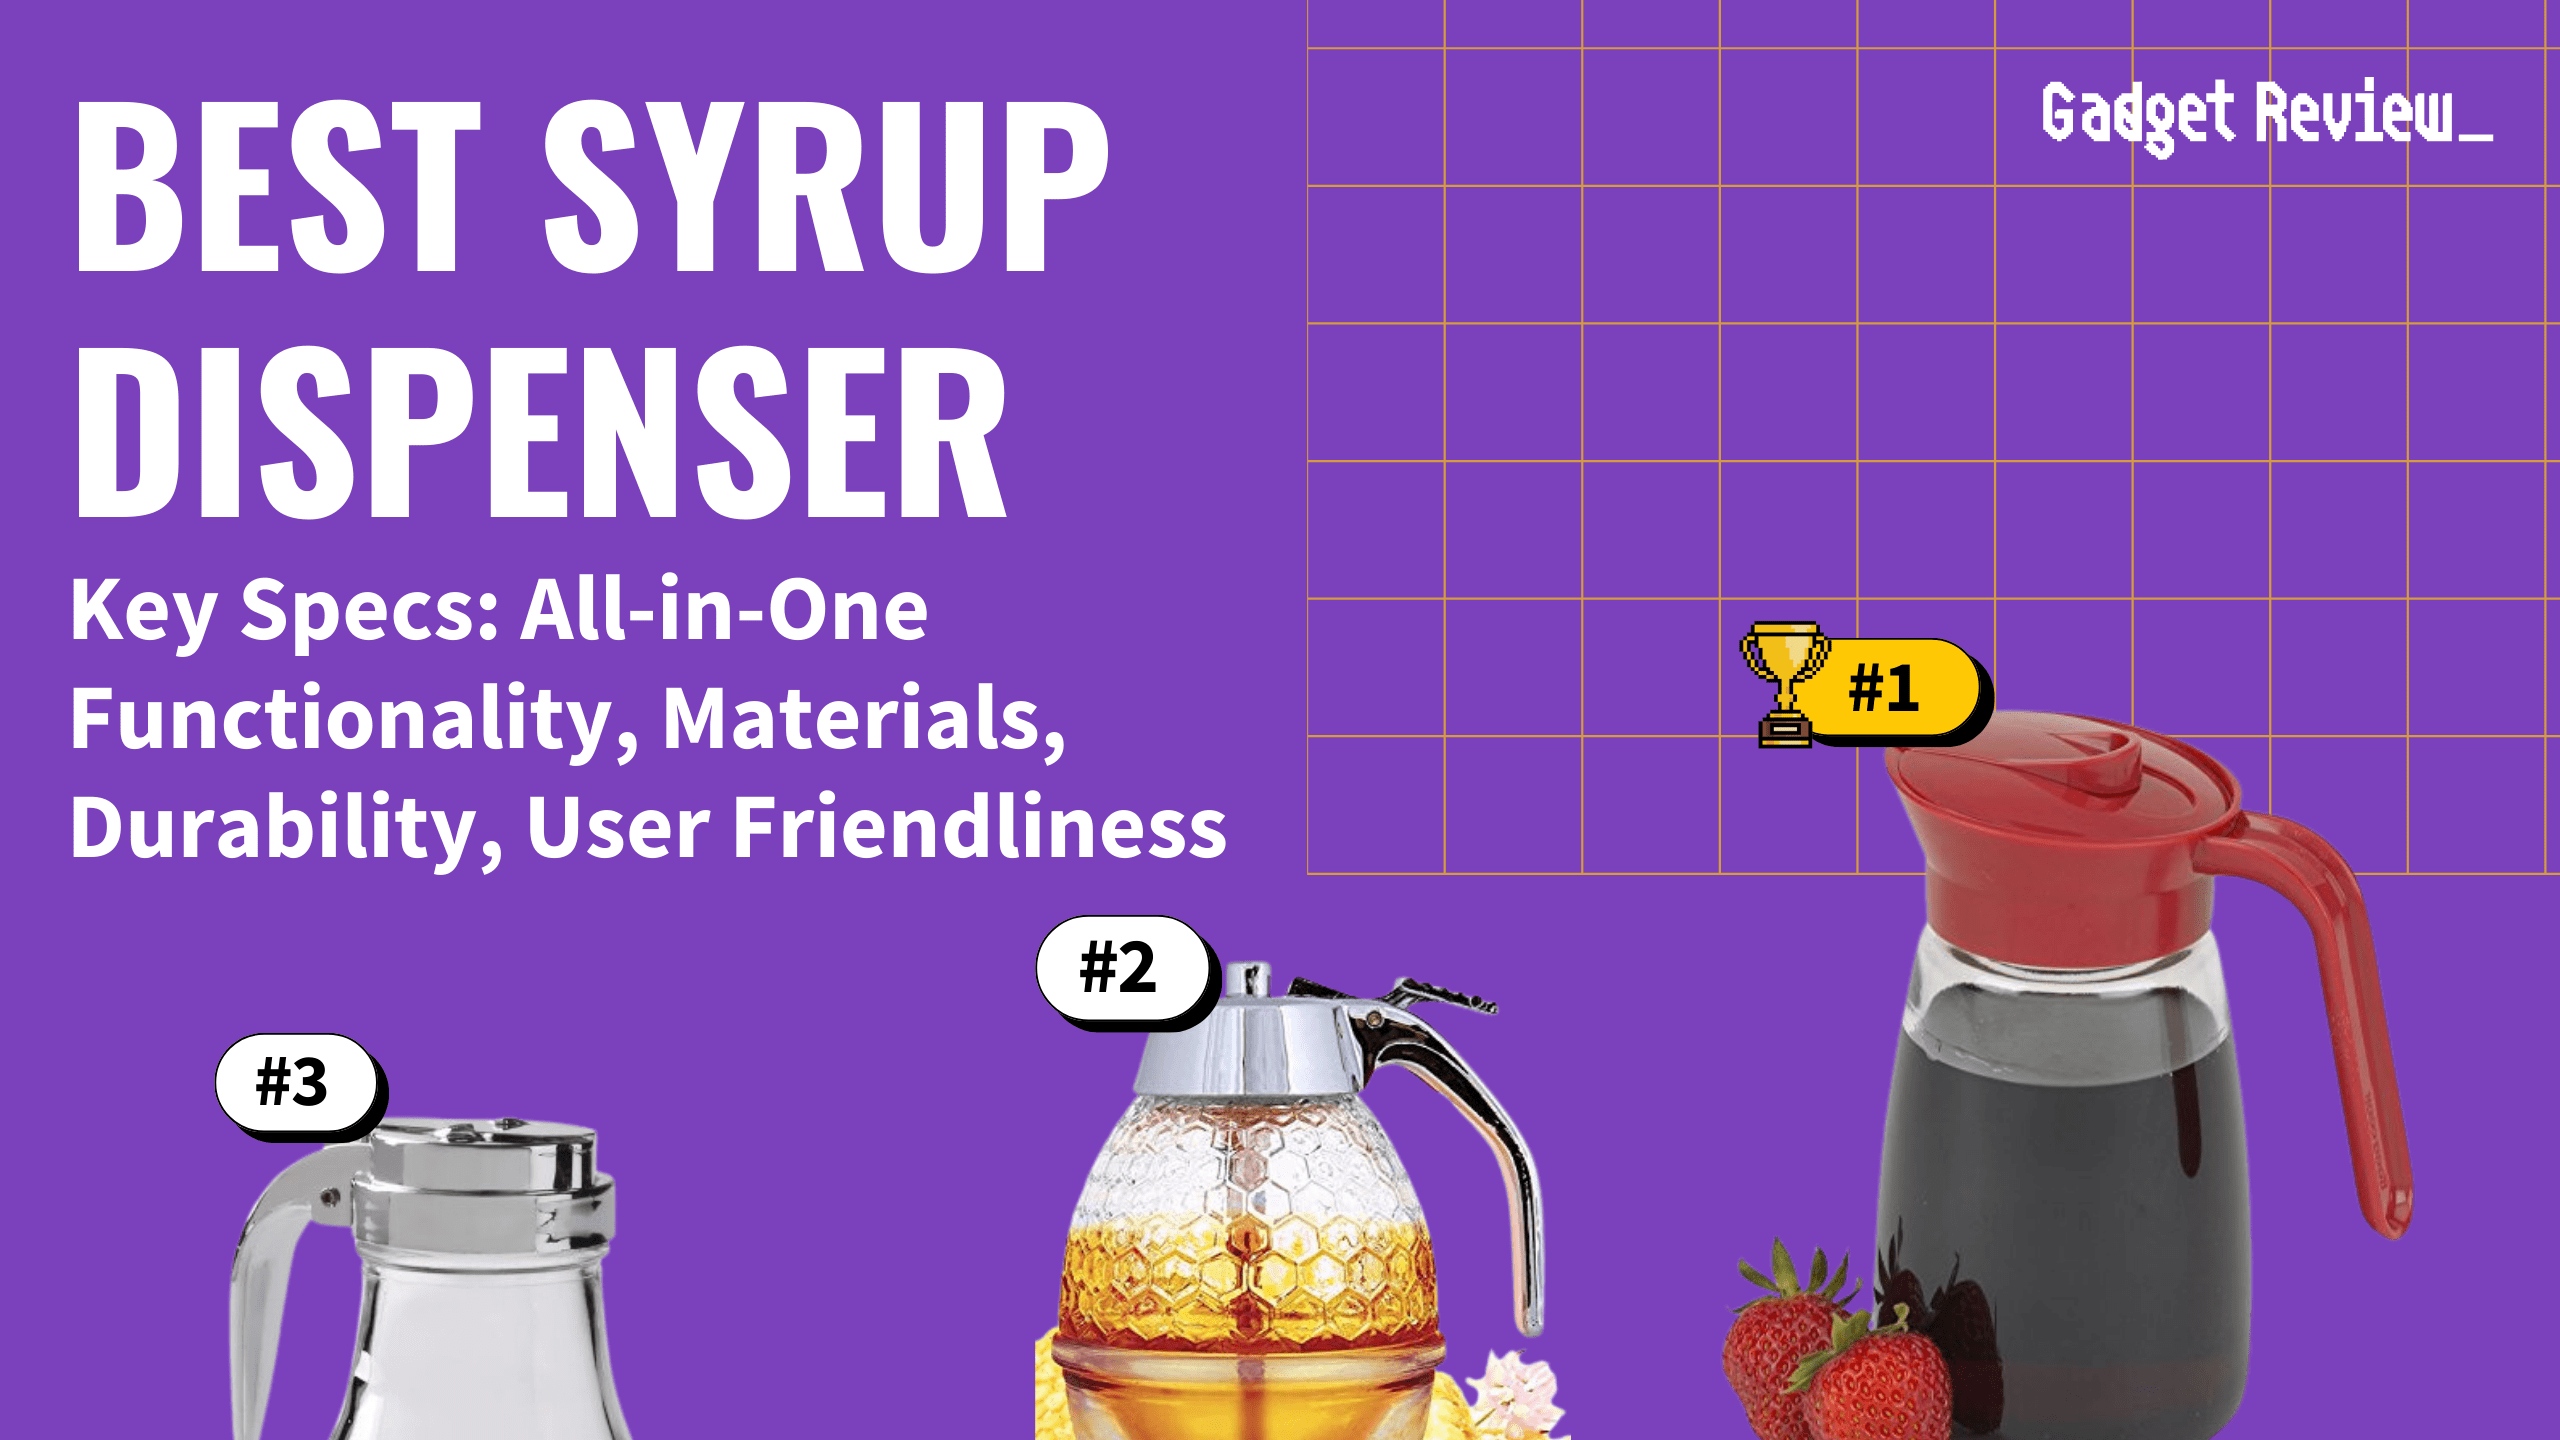 best syrup dispenser featured image that shows the top three best kitchen product models